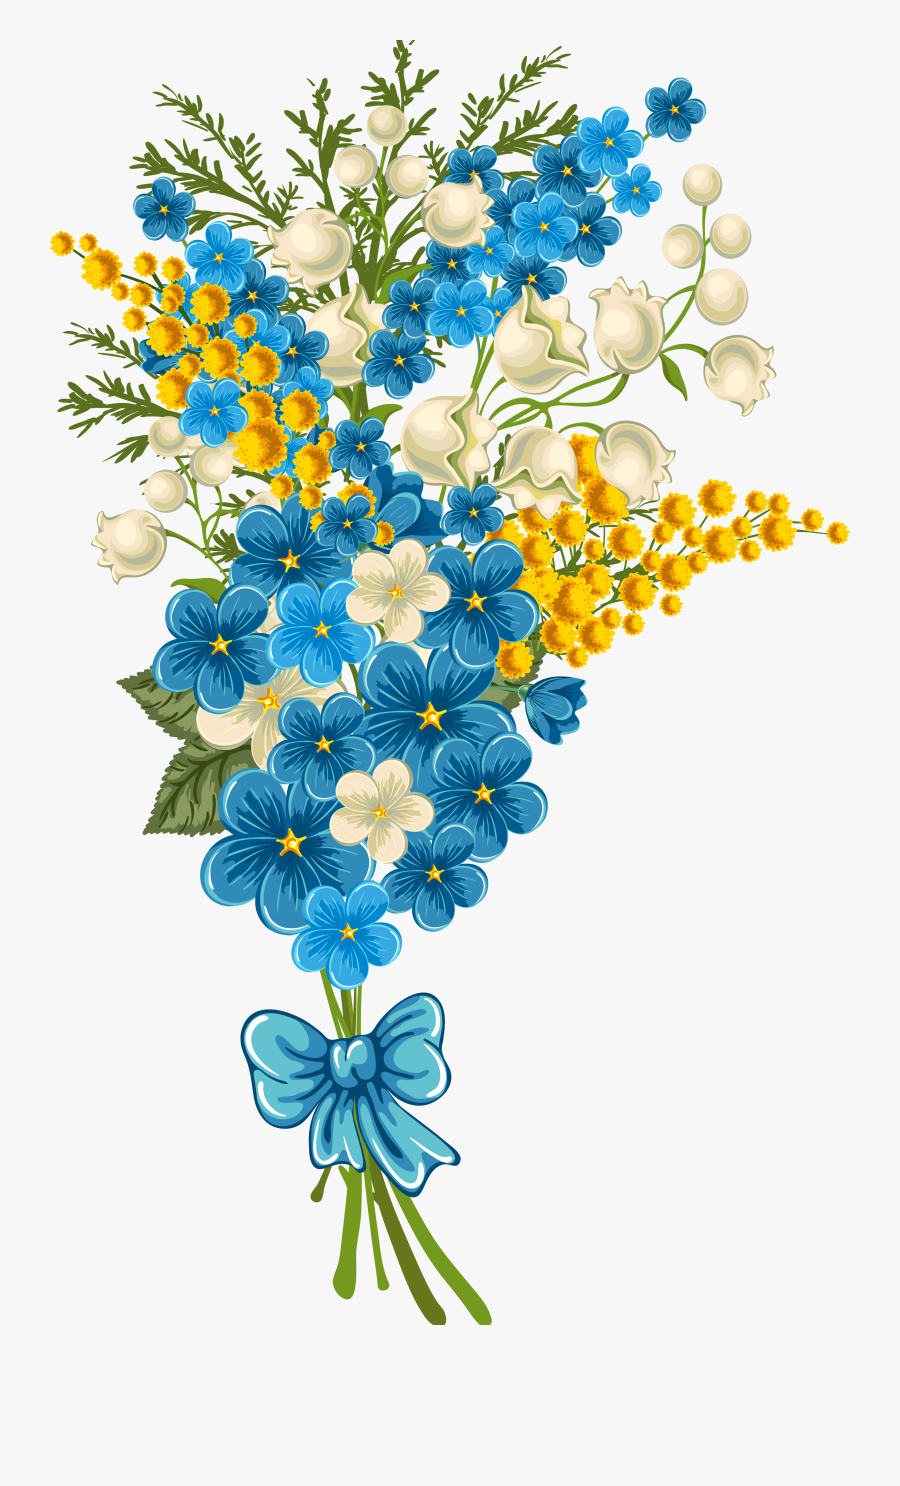 Art Flowers, Pretty Flowers, Flower Art, Flower Canvas, - Beautiful Border Designs For Projects, Transparent Clipart